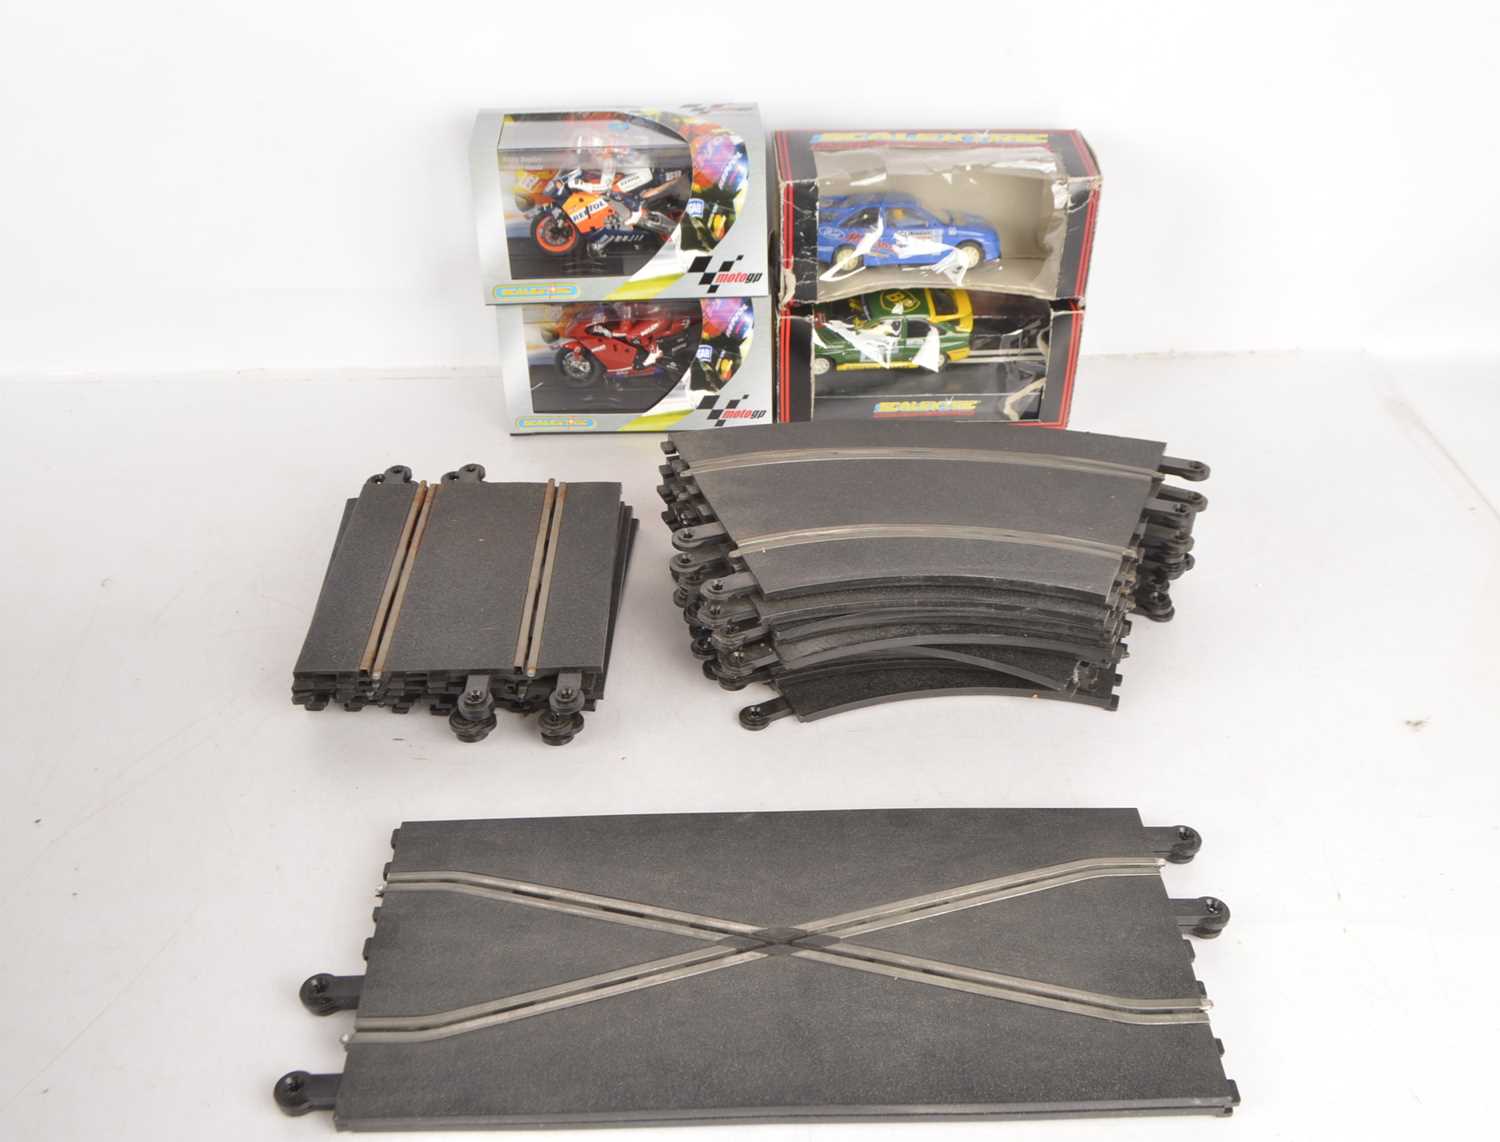 Hornby Scalextric C640 500TT Sidecar Set and additional Motorbikes and Cars and Track ,